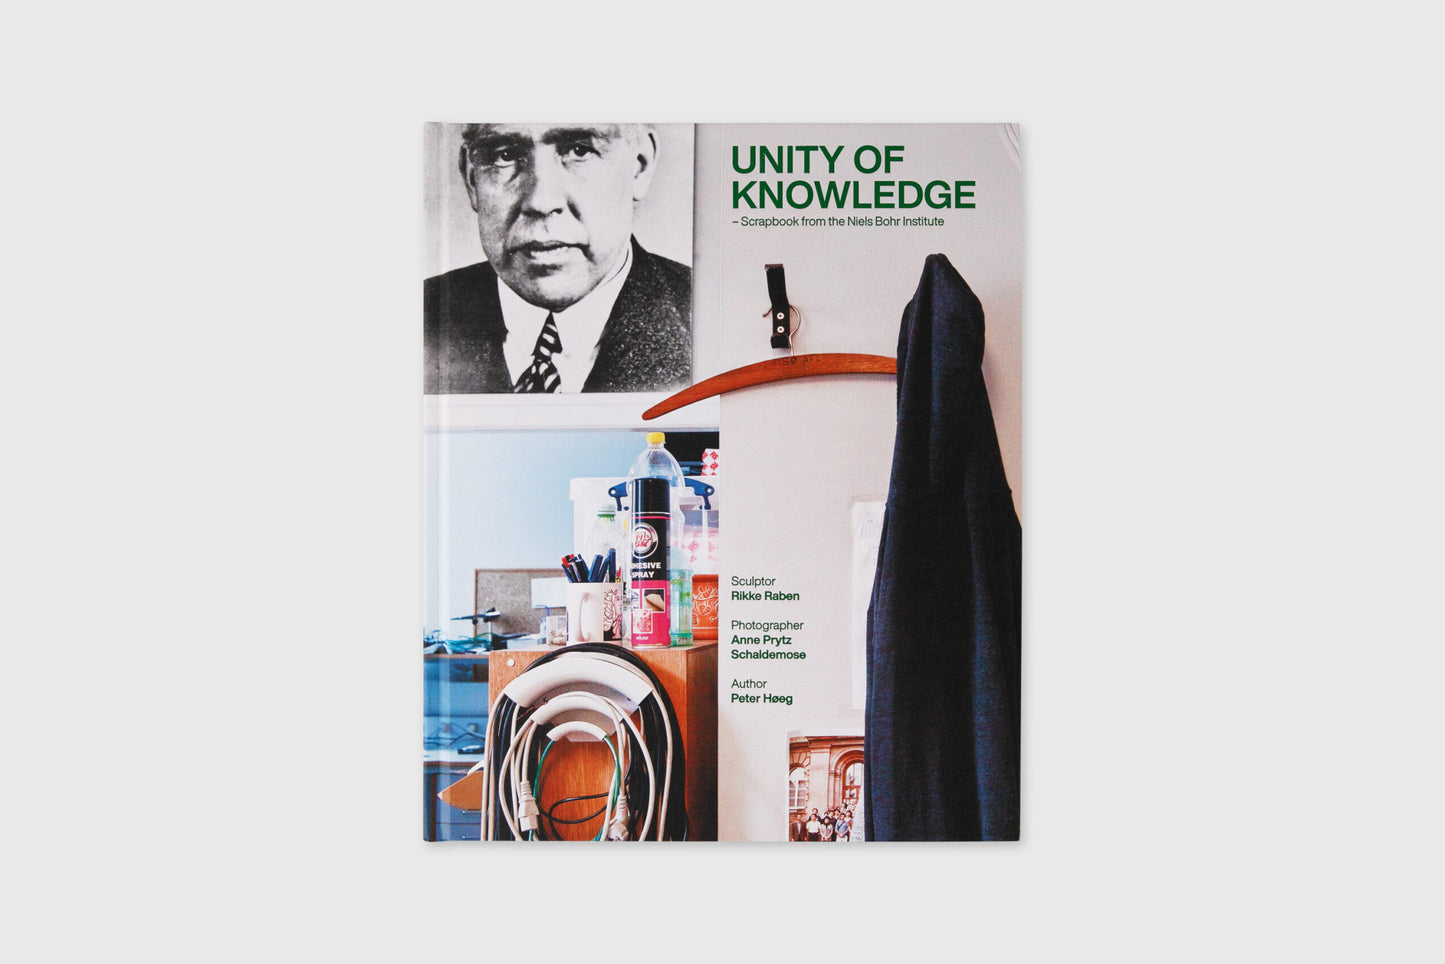 Unity of Knowledge: Scrapbook from the Niels Bohr Institute